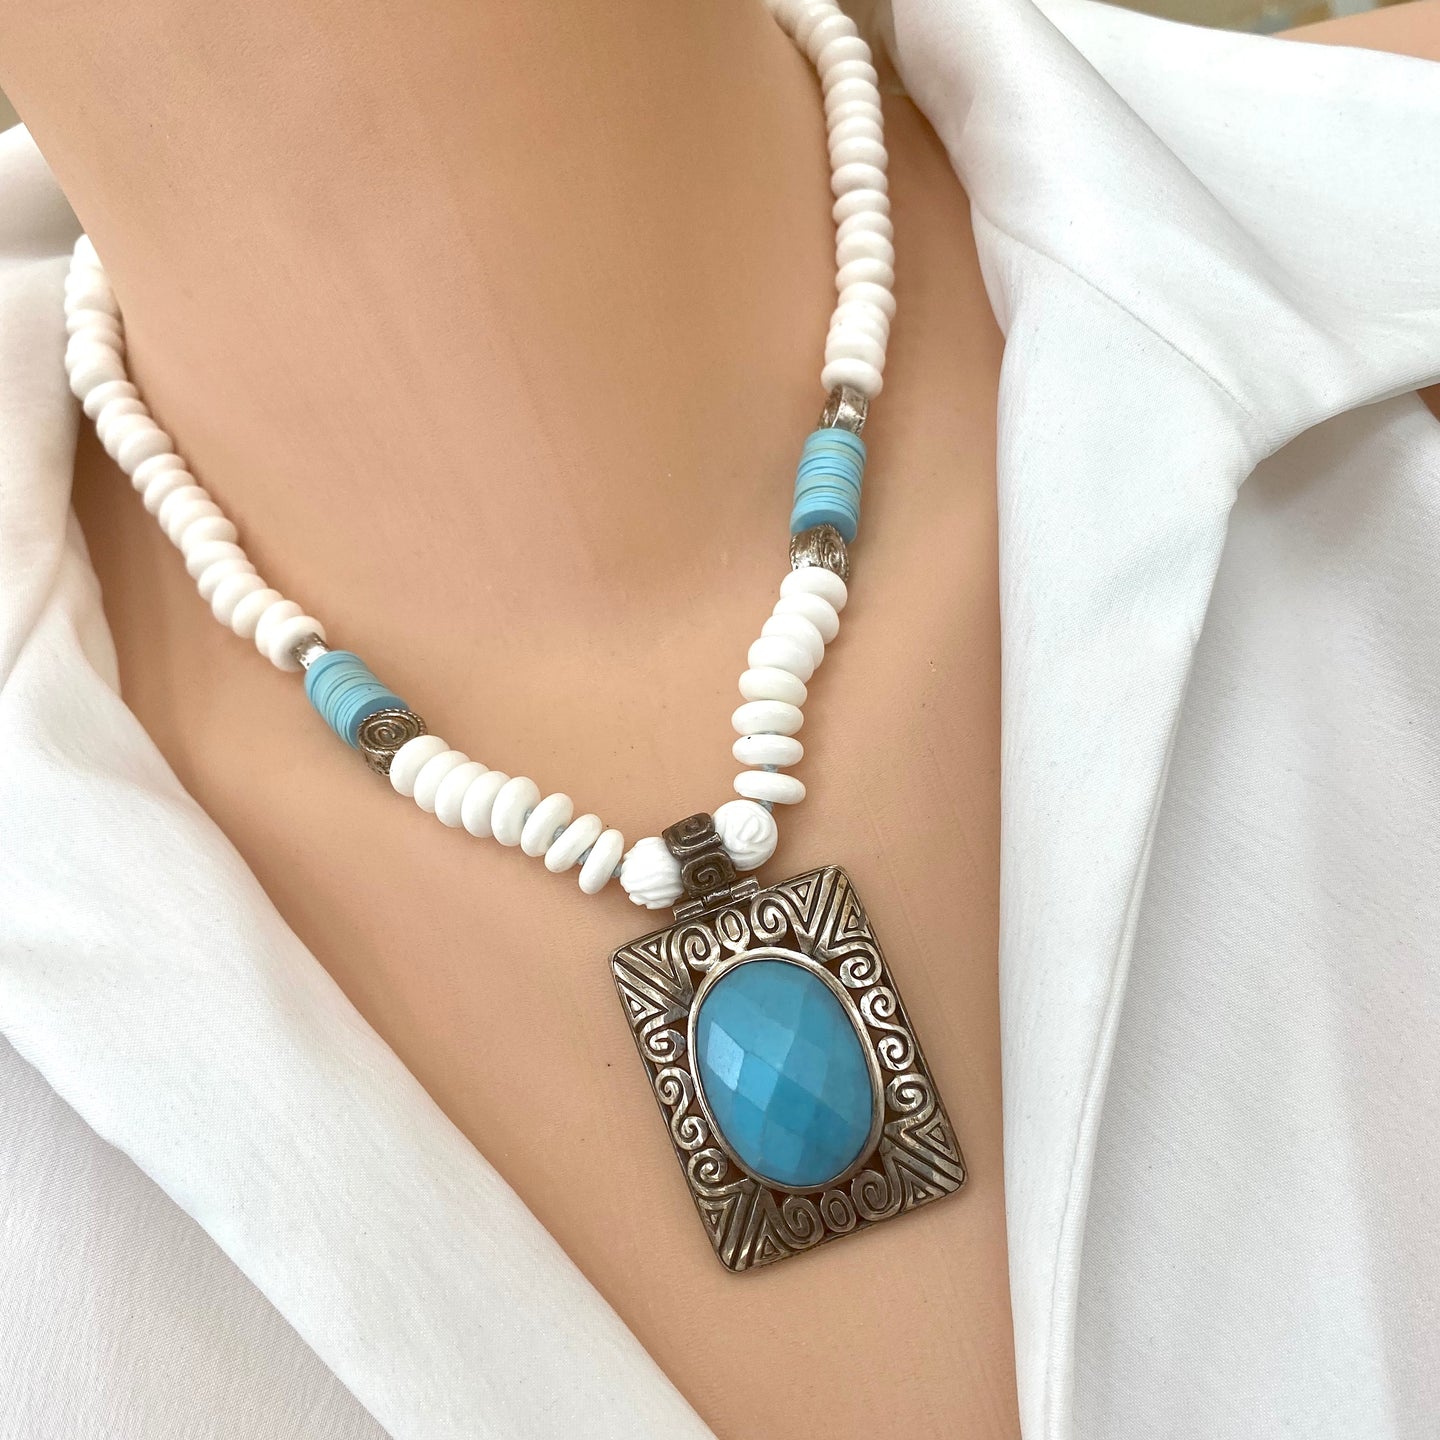 Vintage Turquoise Pendant with Tridacna Shell Beads Necklace, 17.5